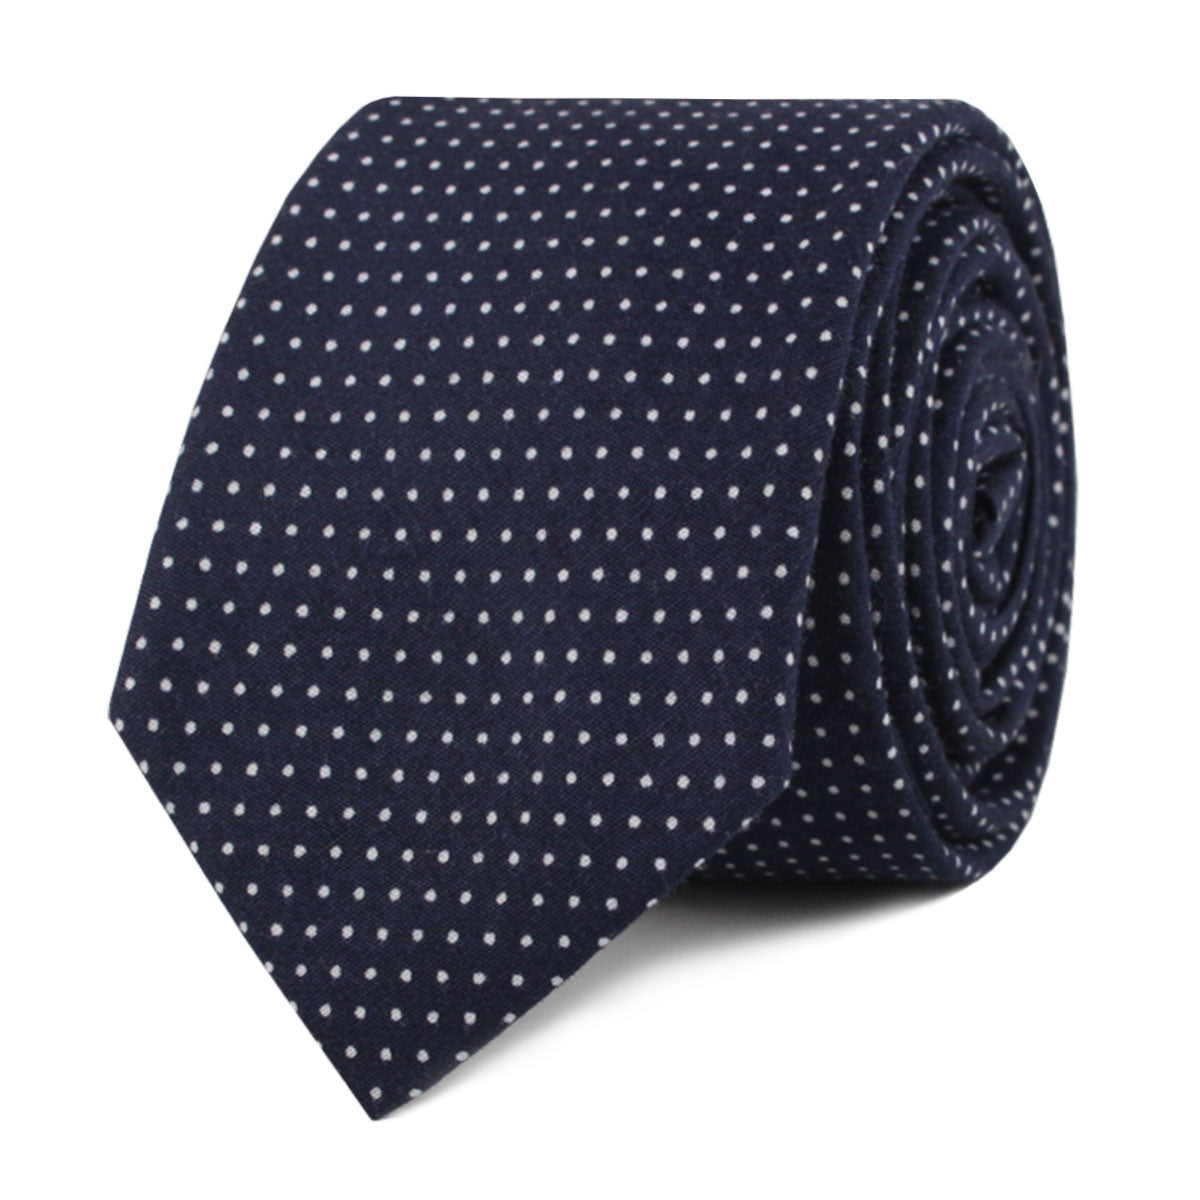 Navy Blue Cotton with White Mini Polka Dots Skinny Tie Front Roll